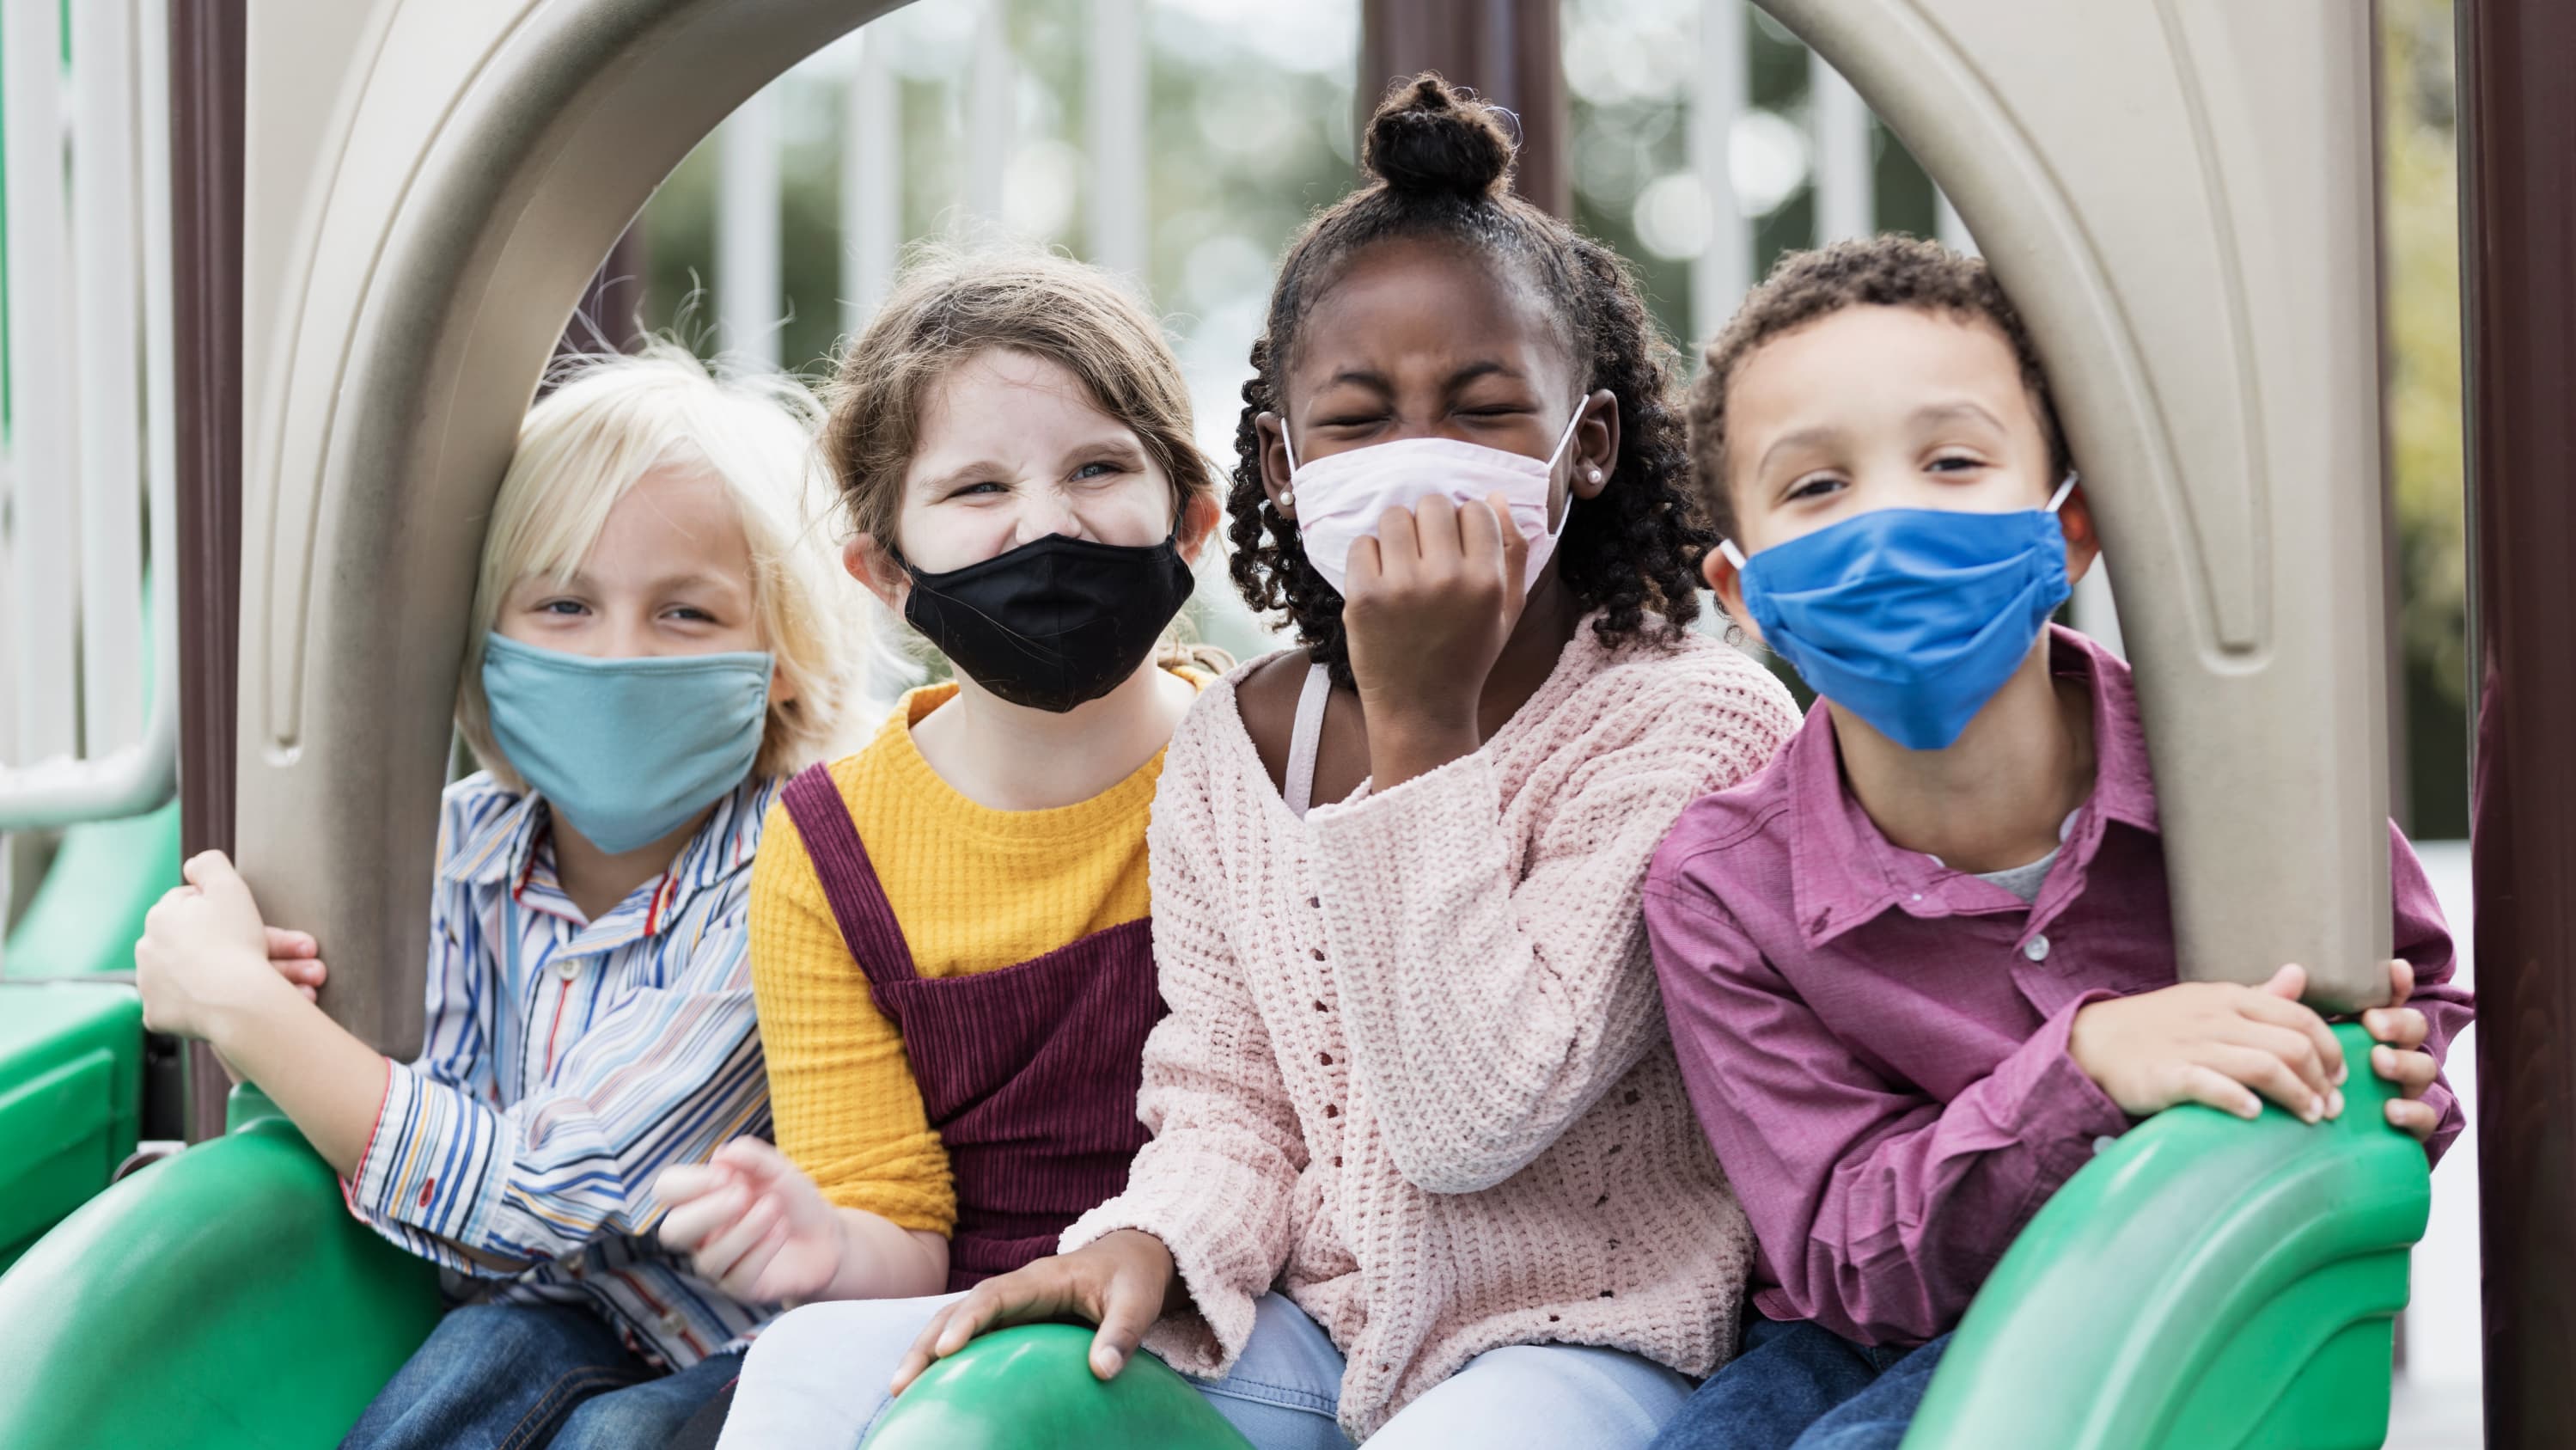 masked kids in a playground who might benefit from COVID-19 vaccine clinical trials